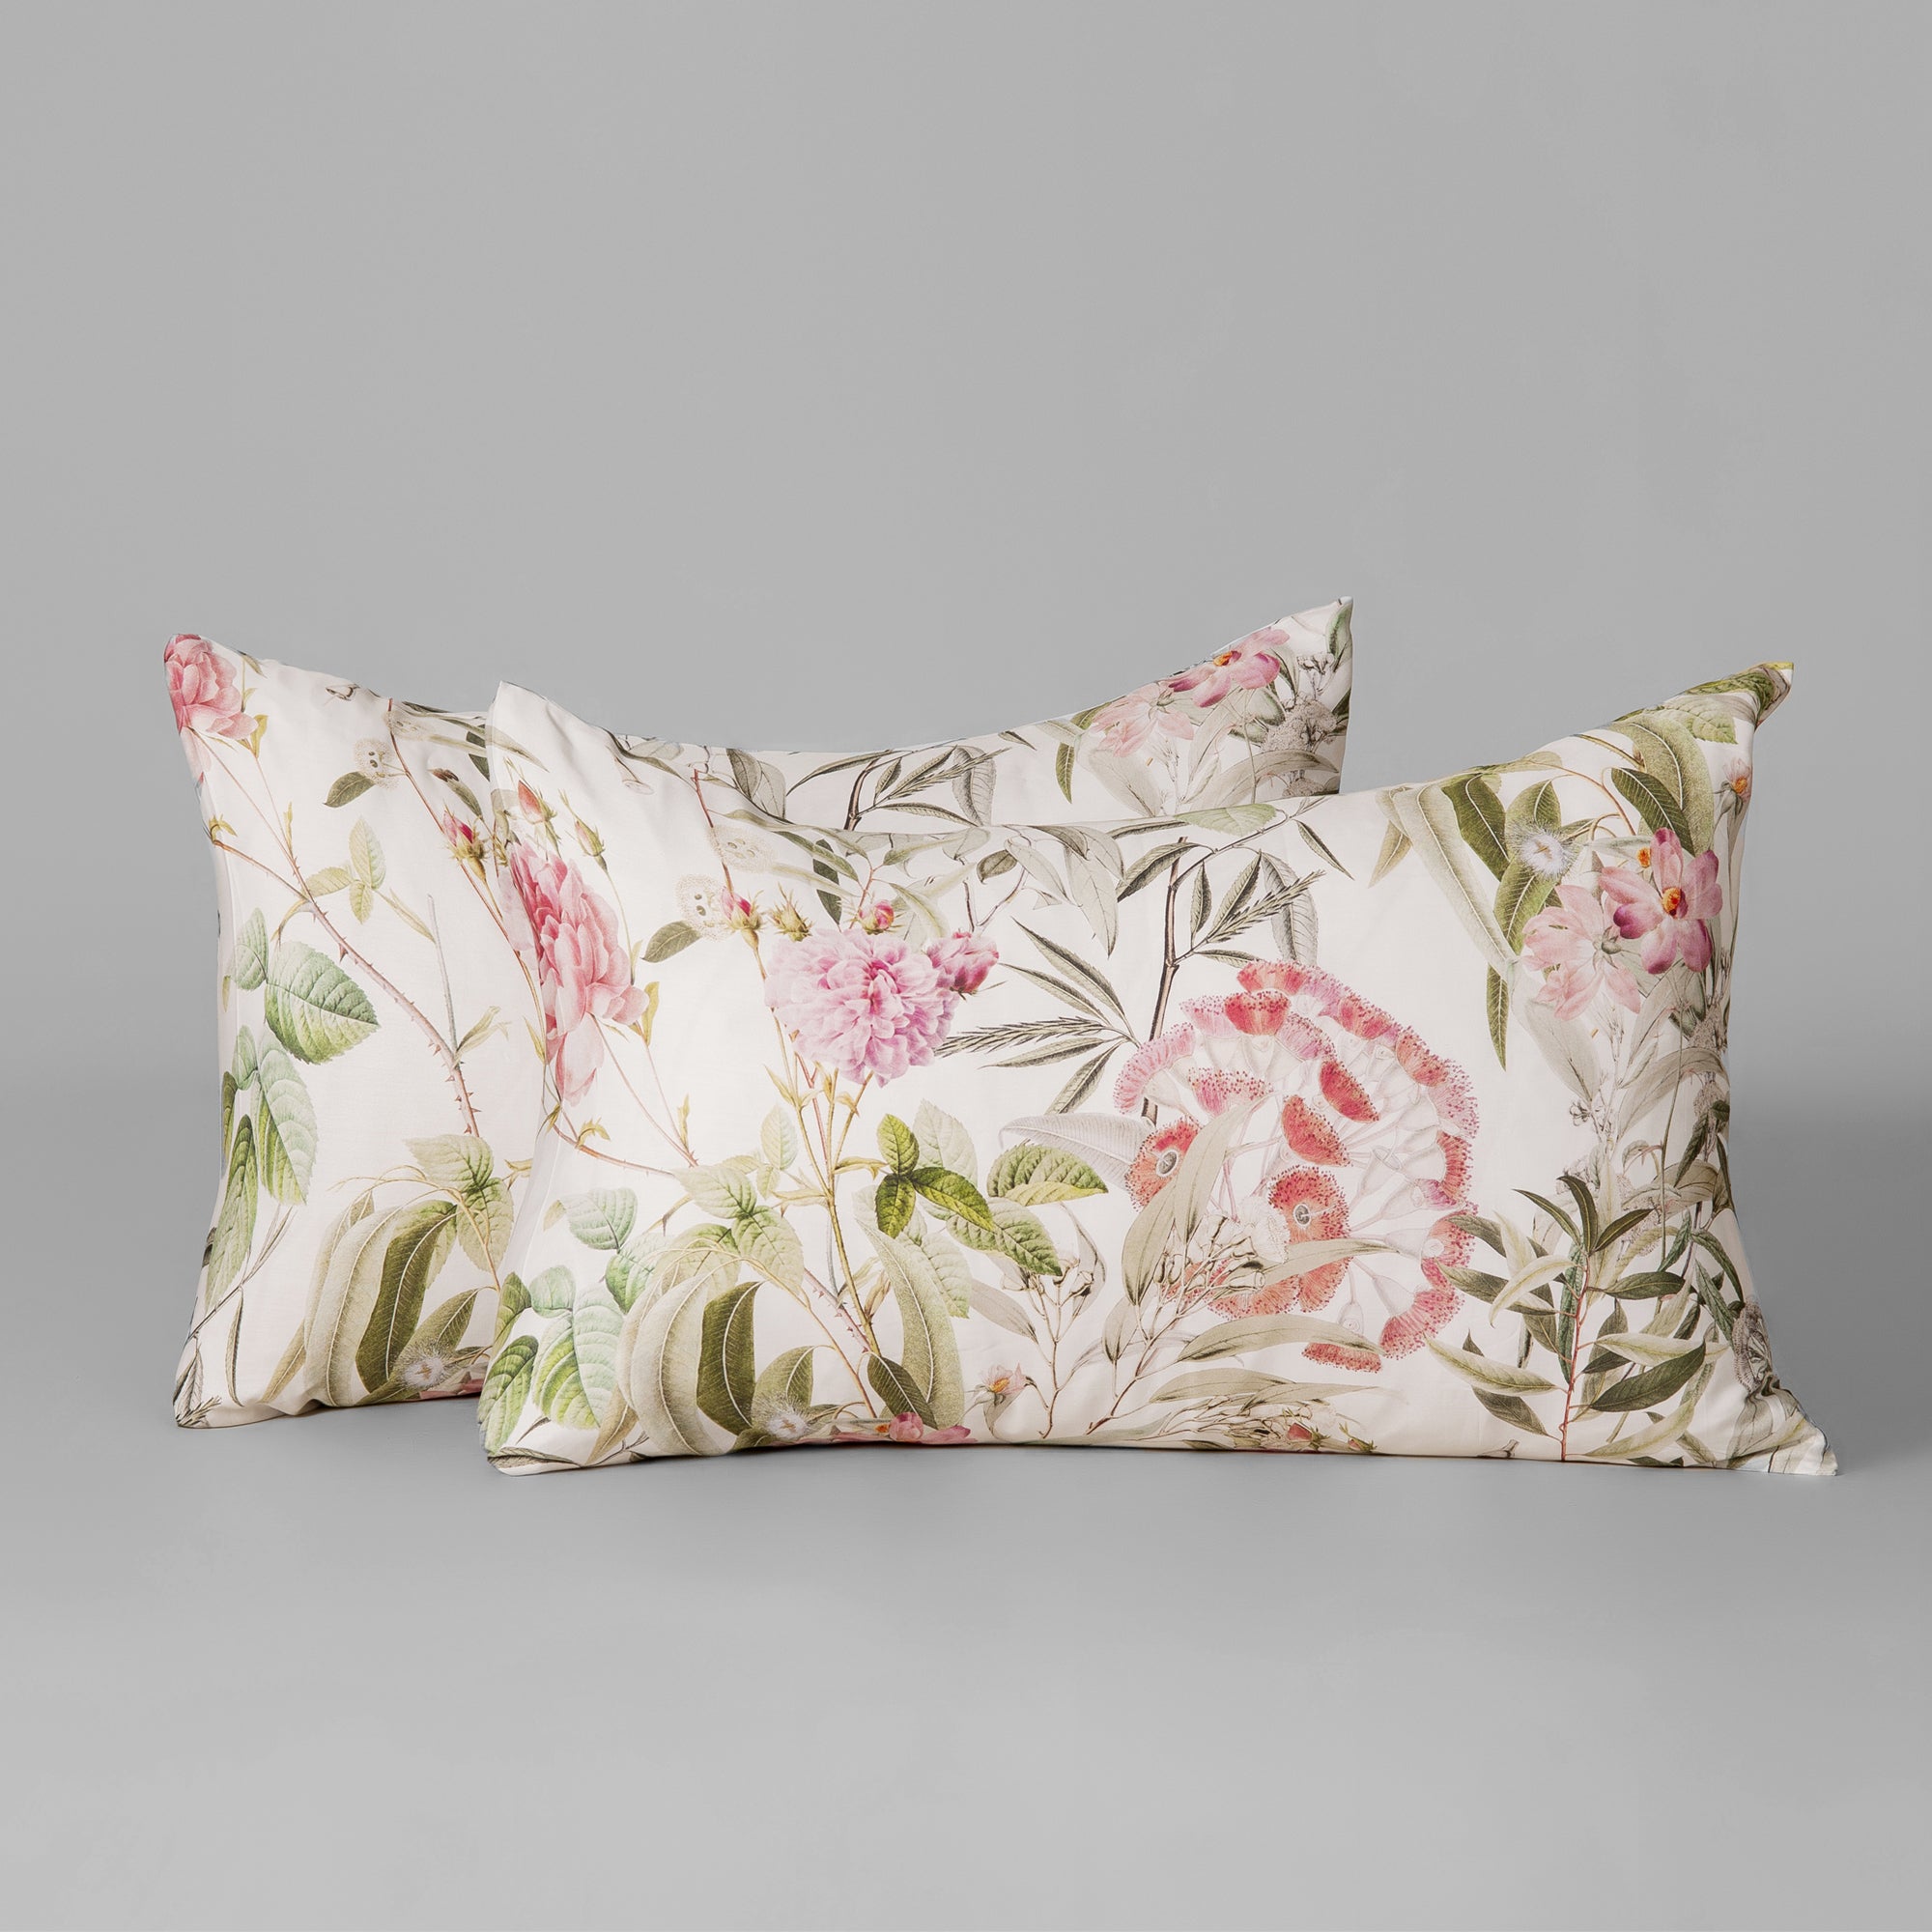 The Linen Company Bedding Standard Spring Bloom Pillowcases